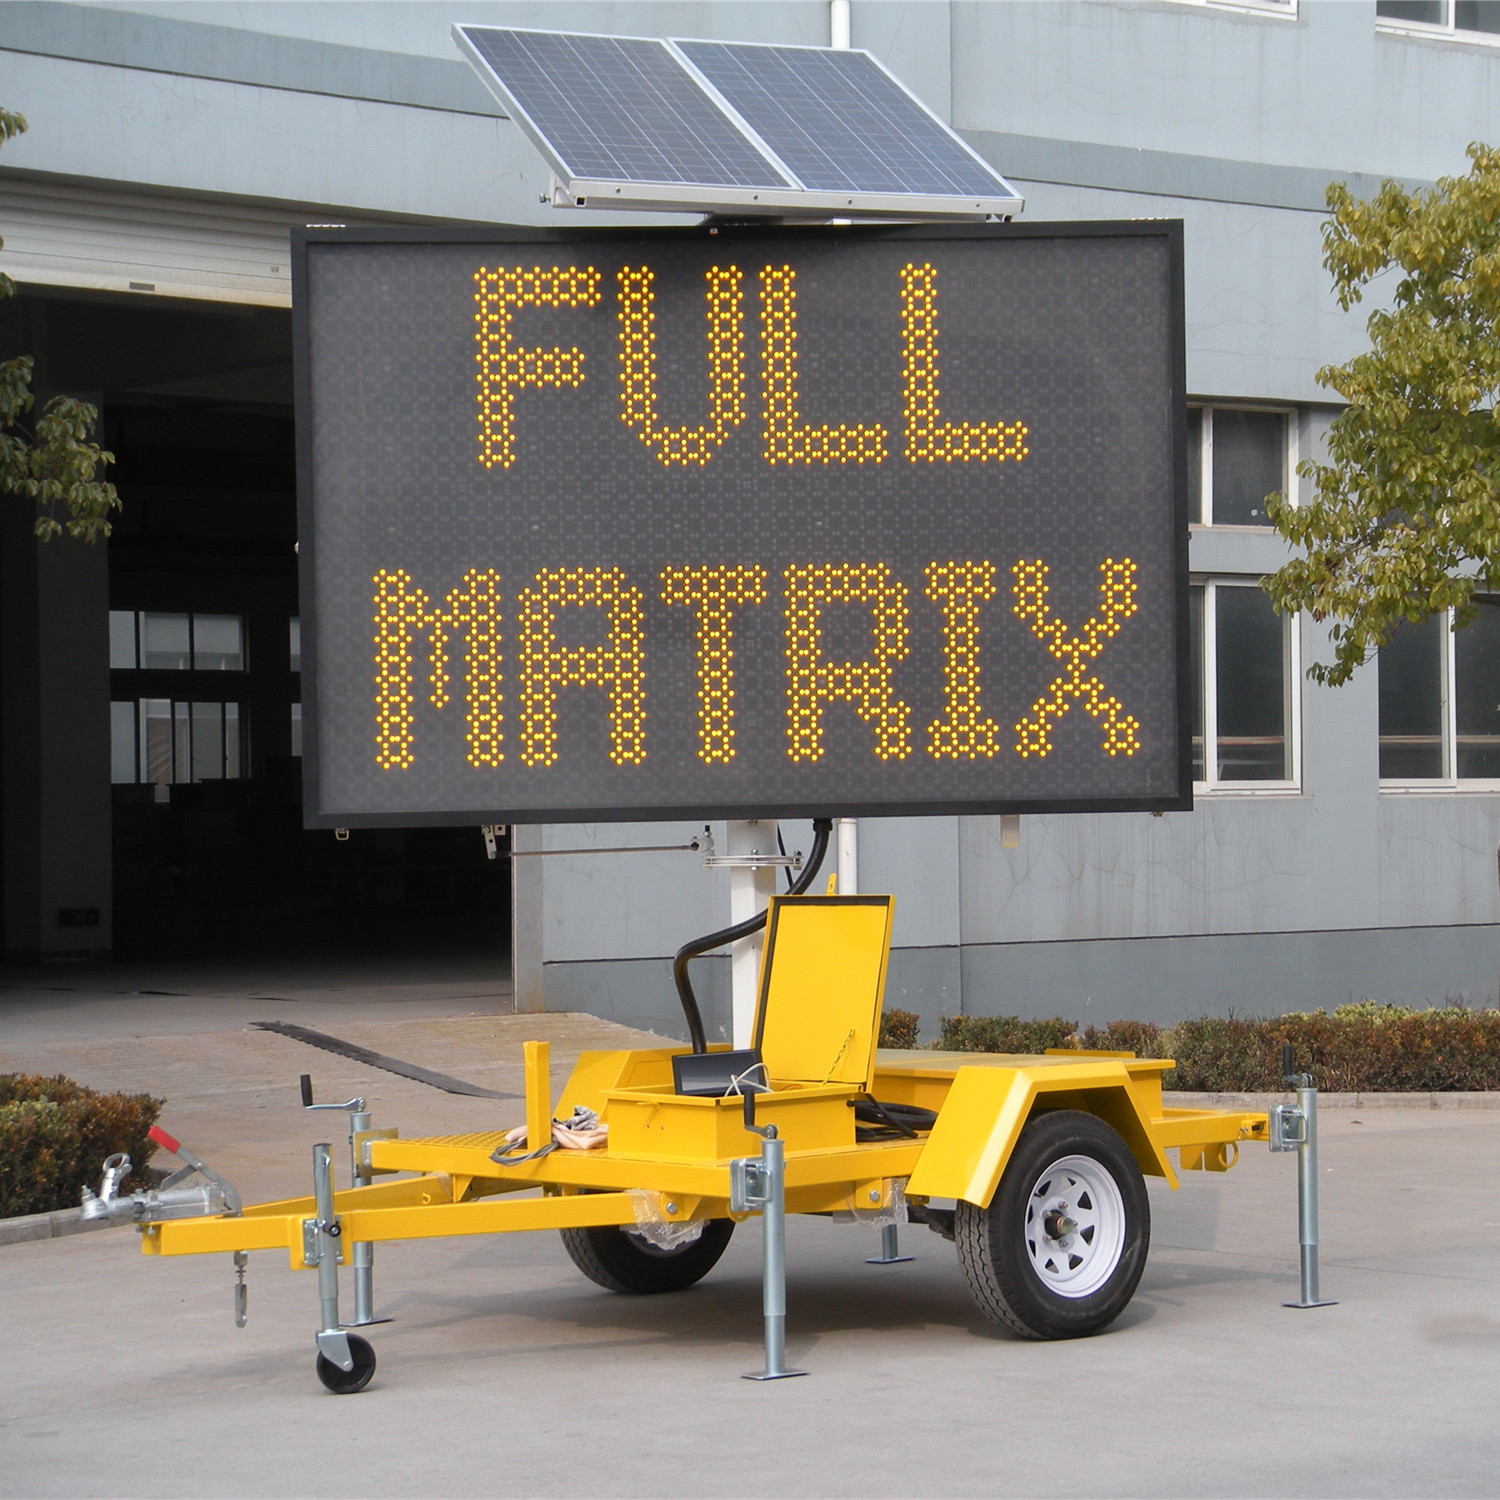 High Quality Large Size Amber Color Variable Message Traffic Sign with Both Onside and Remote Control